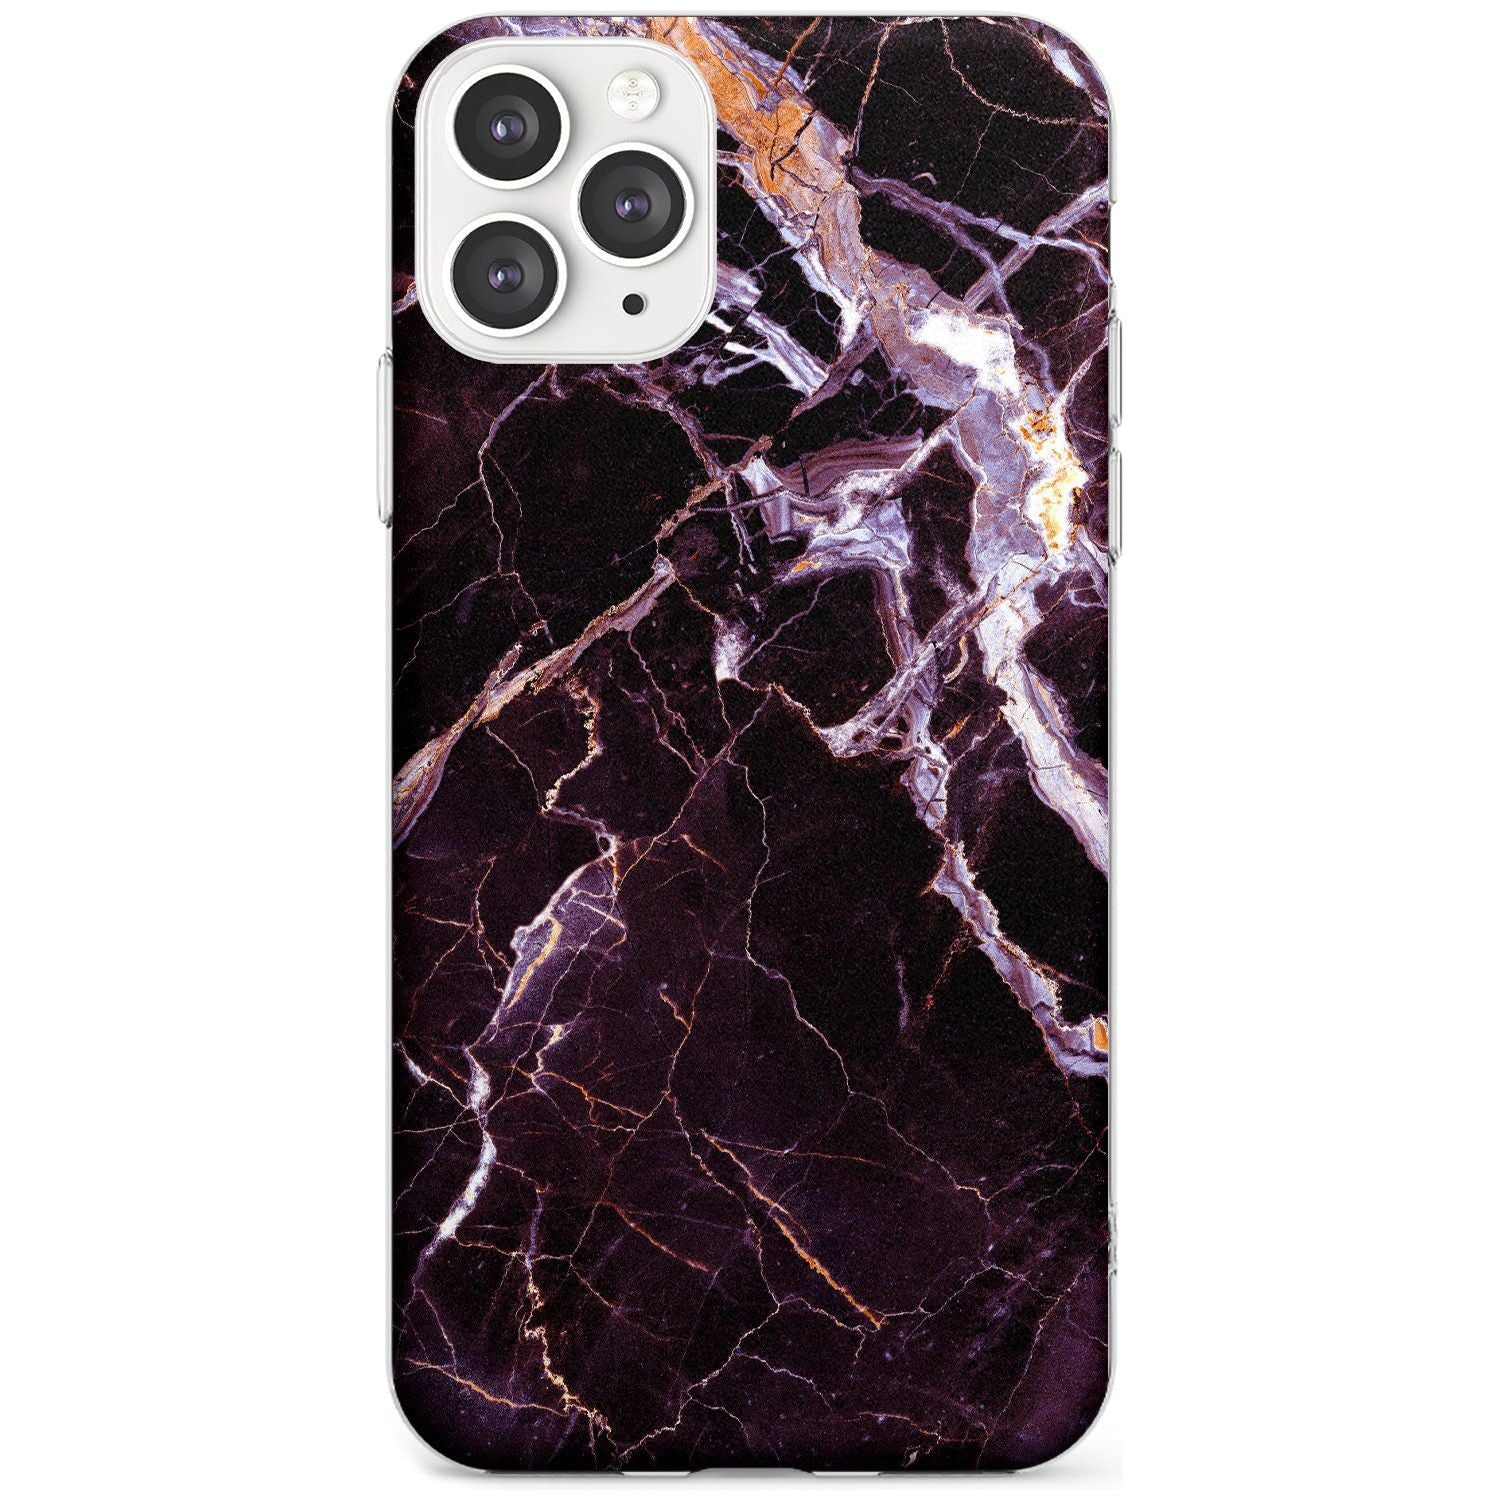 Black, Purple & Yellow shattered Marble Slim TPU Phone Case for iPhone 11 Pro Max